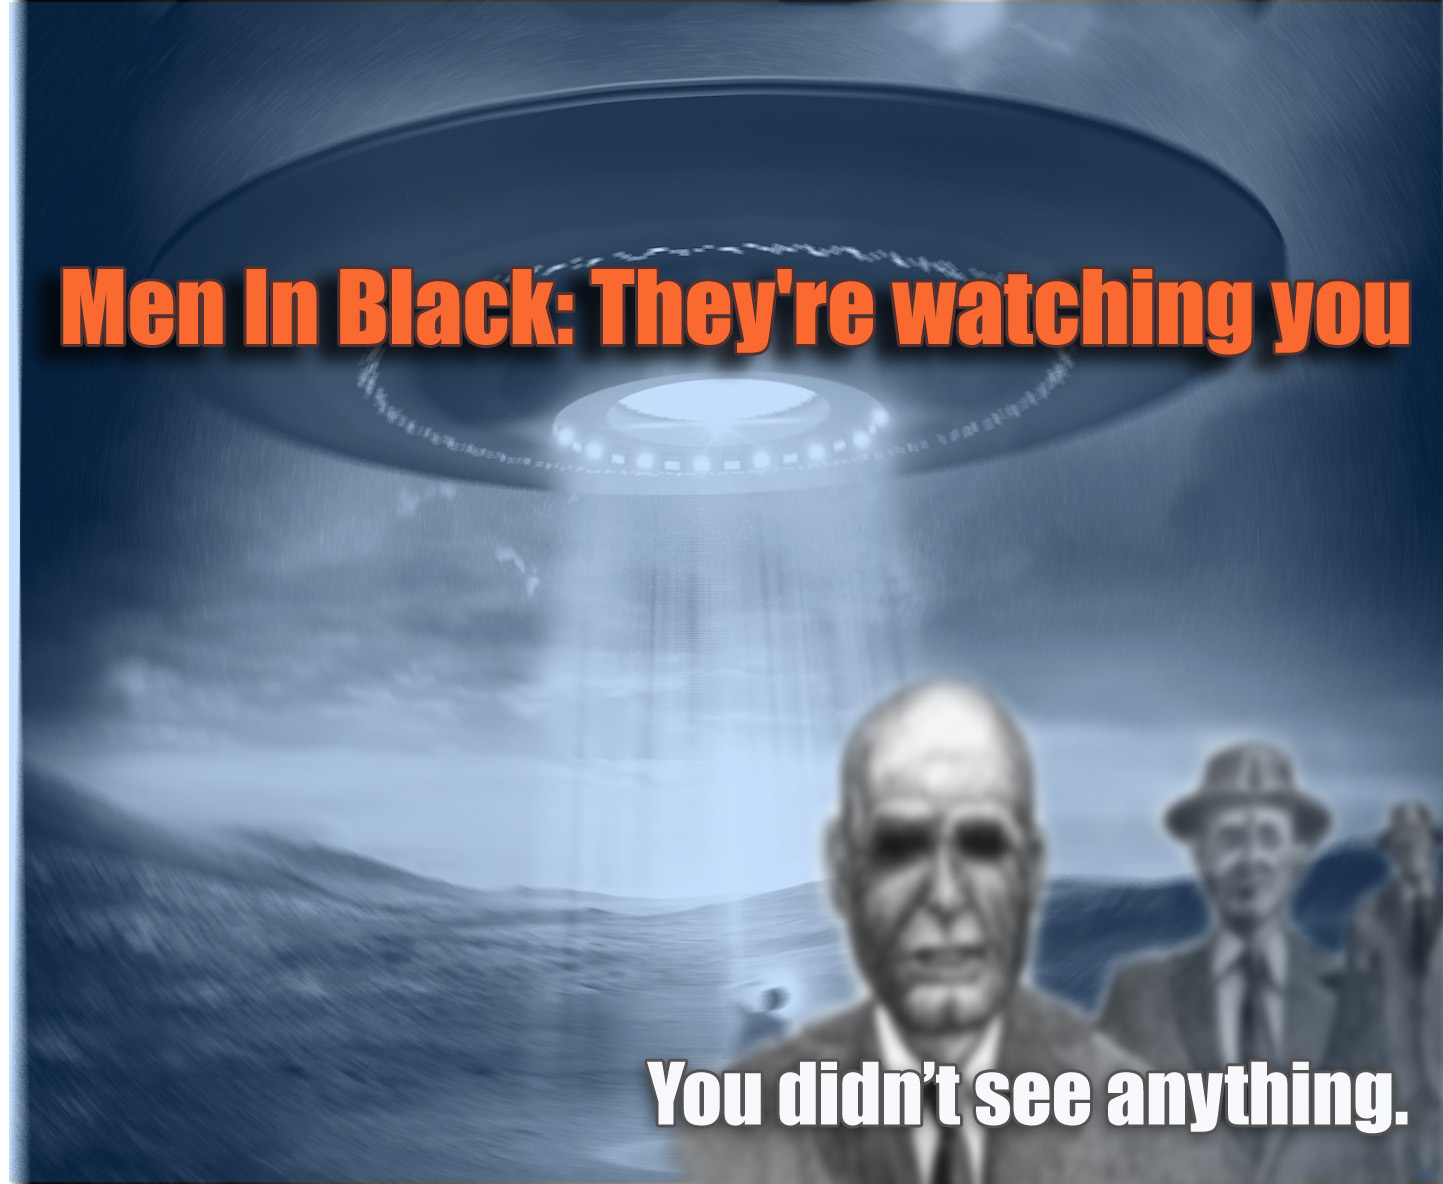 Men In Black: They’re watching you